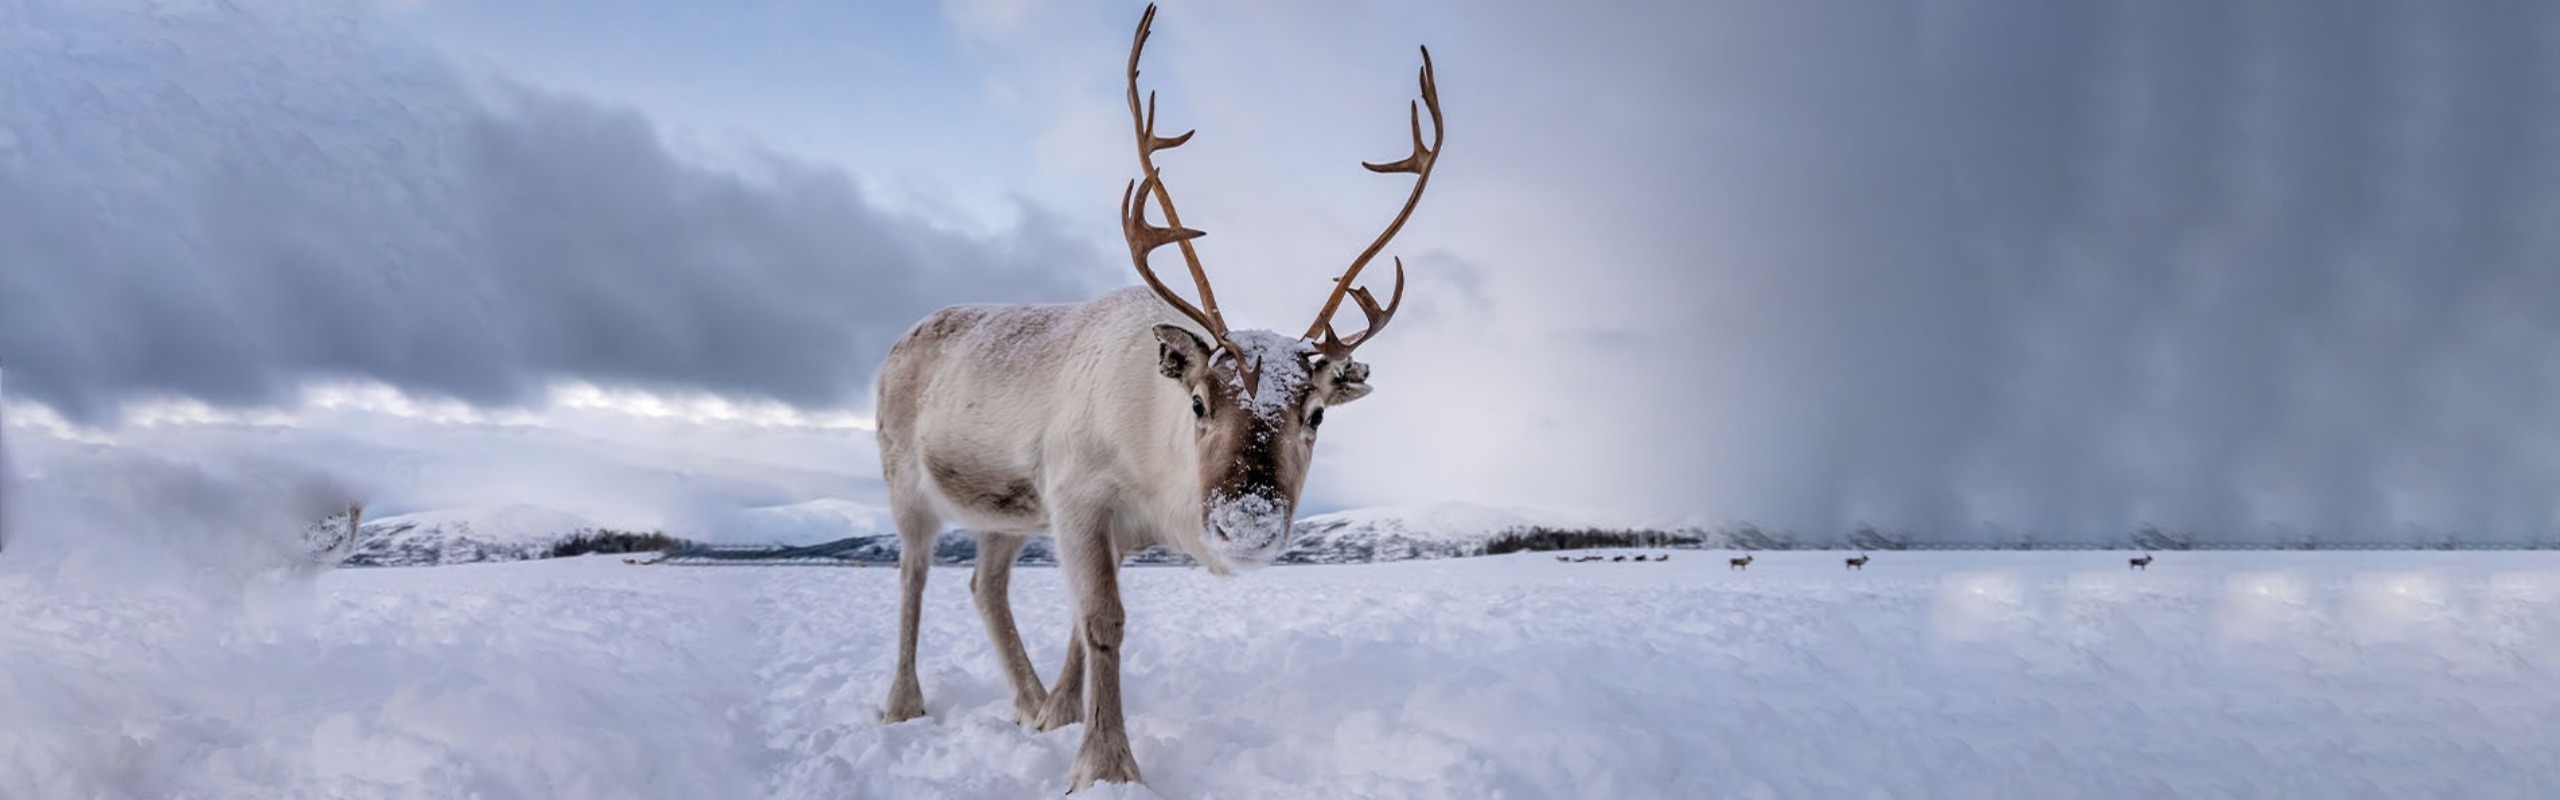 6-Day Hulunbuir Winter Tour with Reindeer Experience